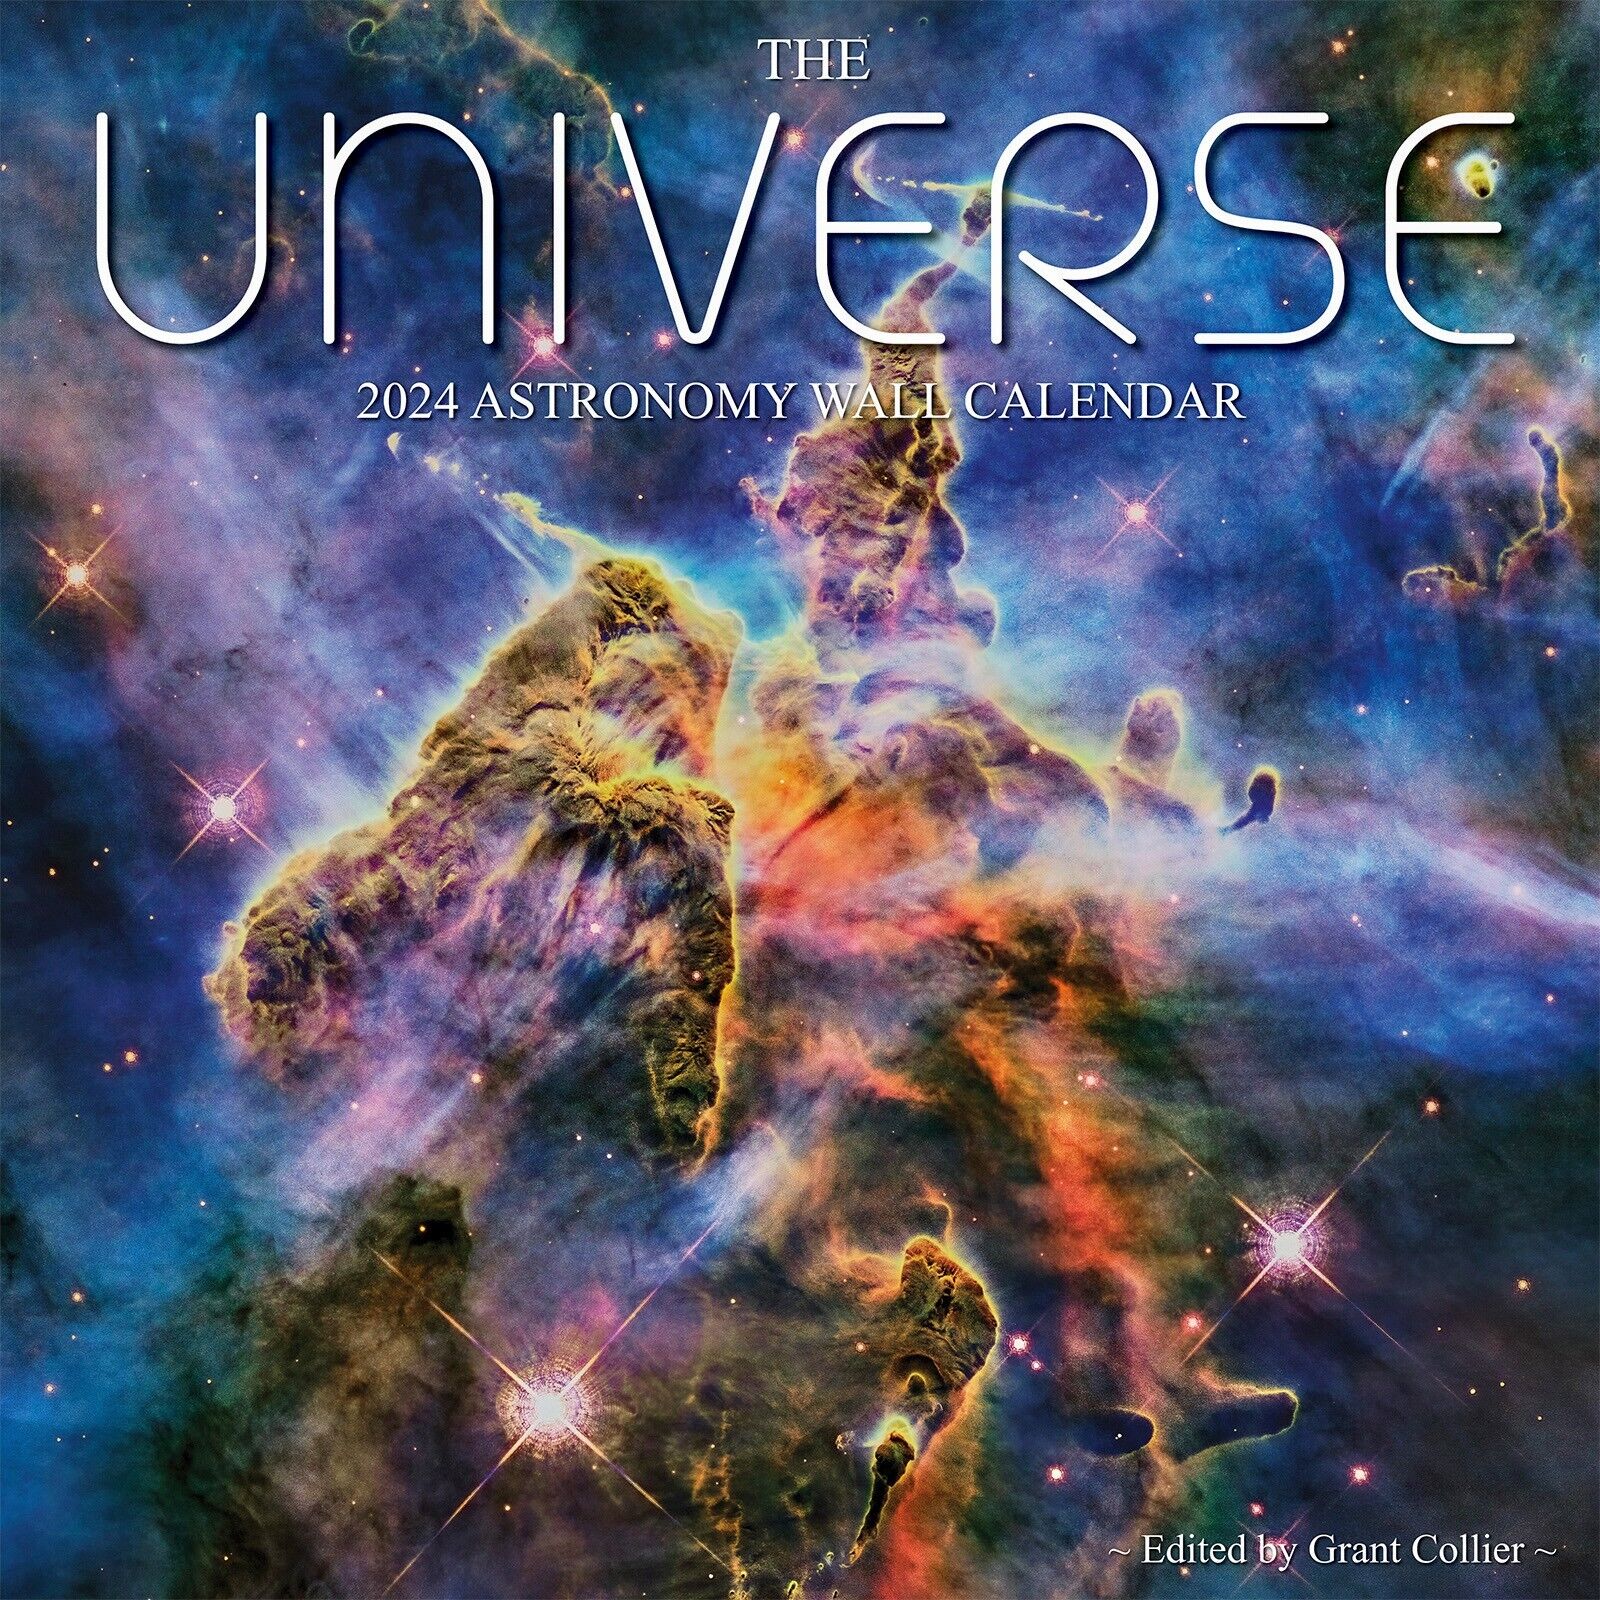 Universe 2024 Astronomy Wall Calendar: Images by NASA's Hubble Space Telescope